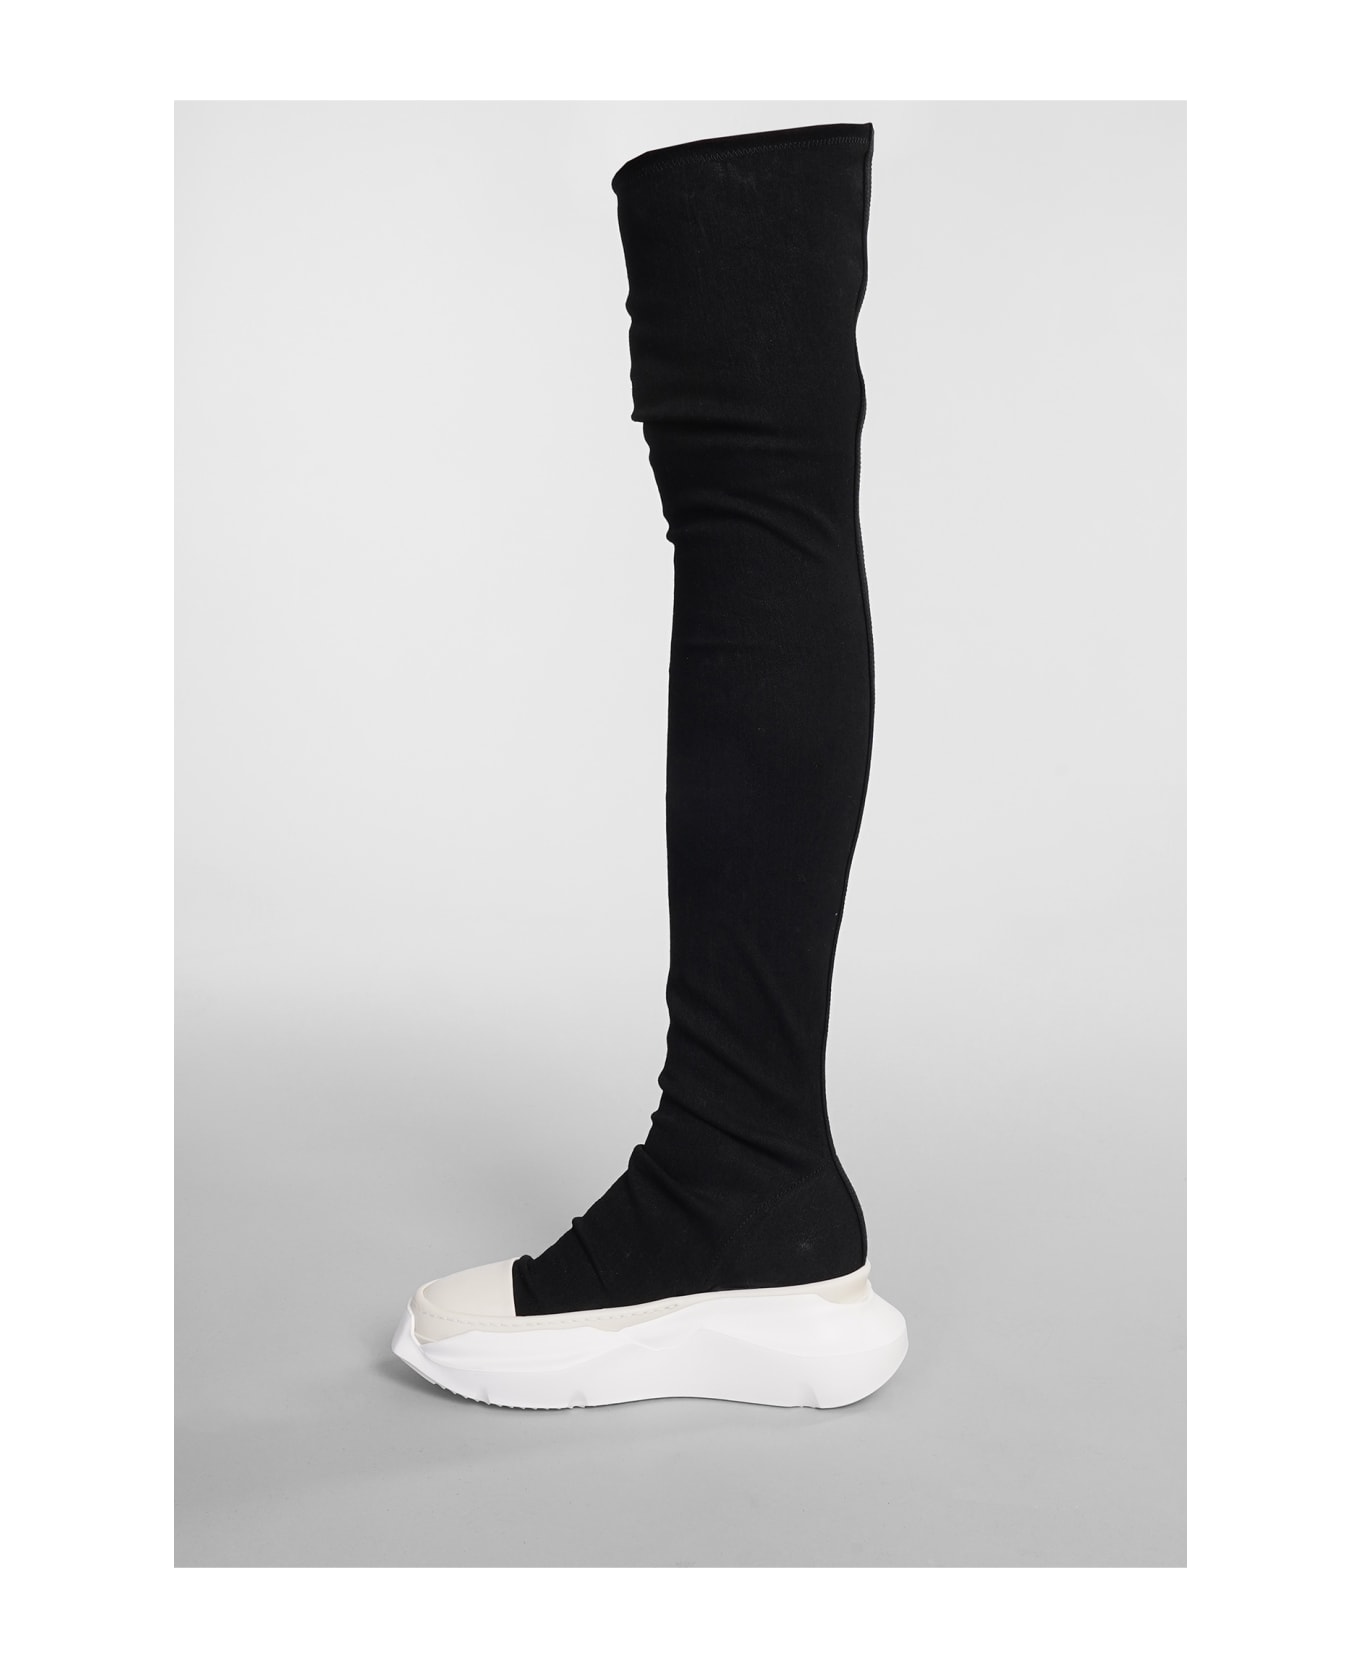 DRKSHDW Abstract Stockings Sneakers In Black Cotton - BLACK/WHITE